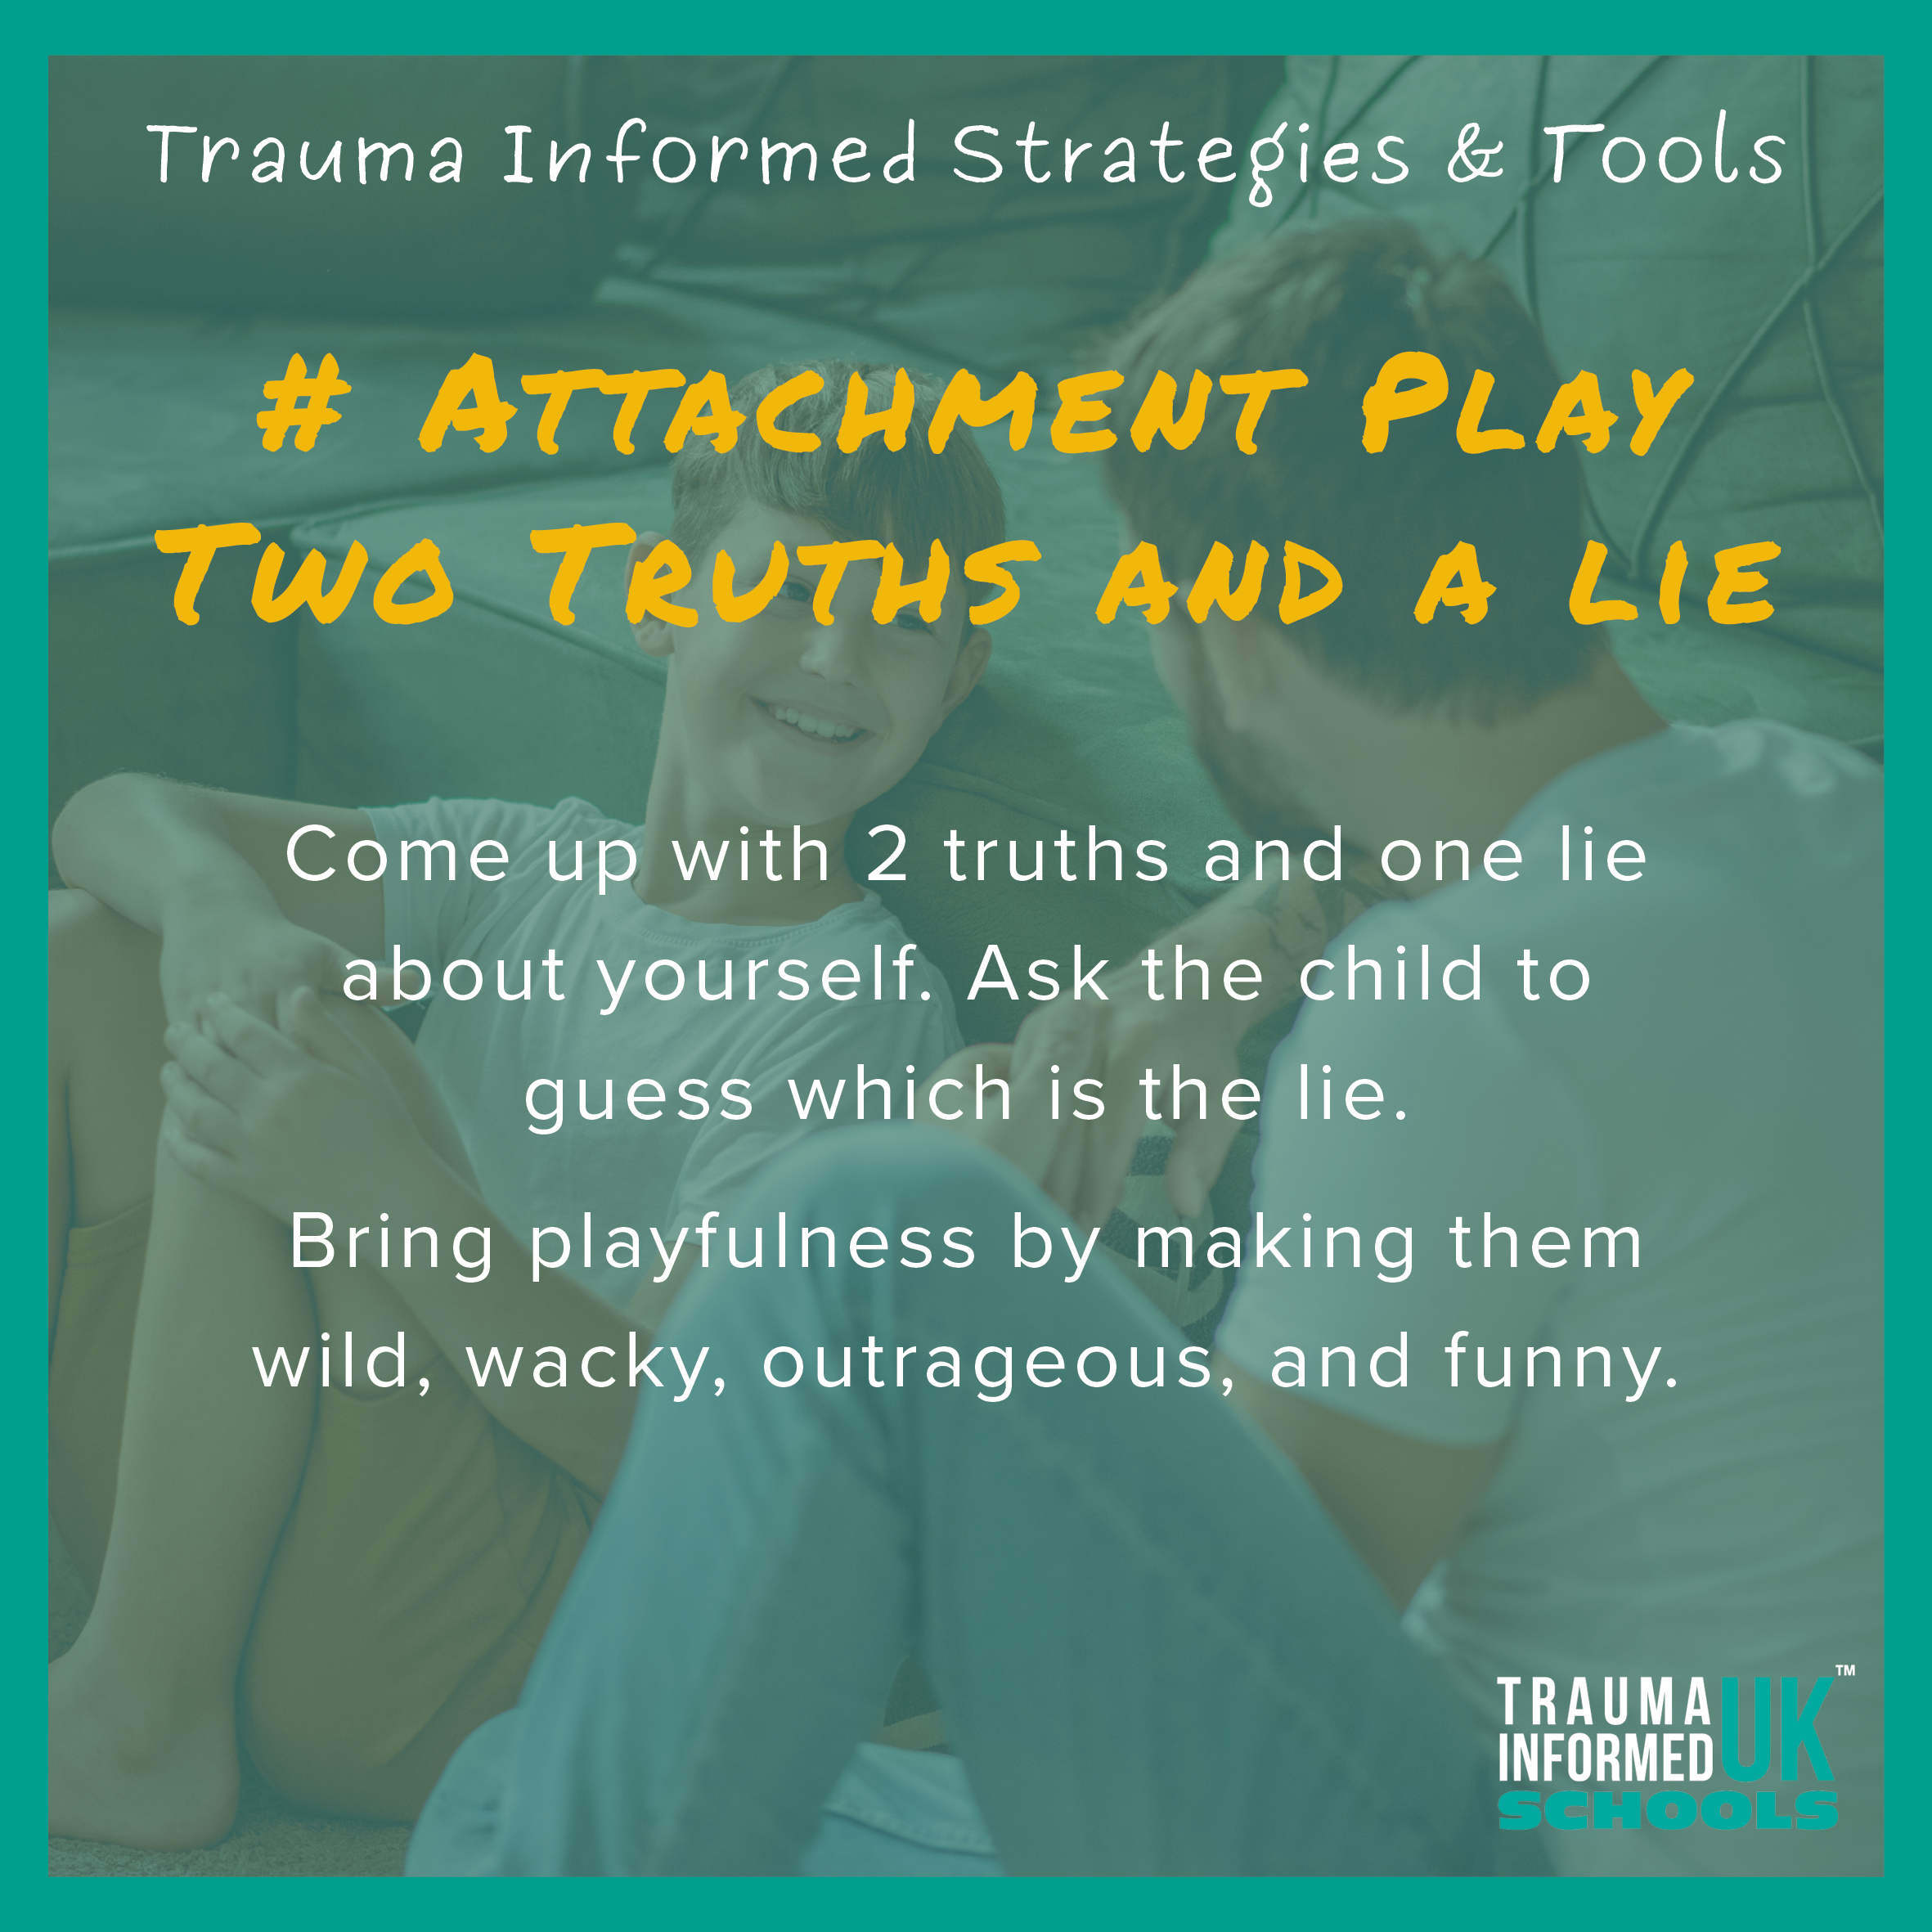 Attachment Play Two Truths and a Lie